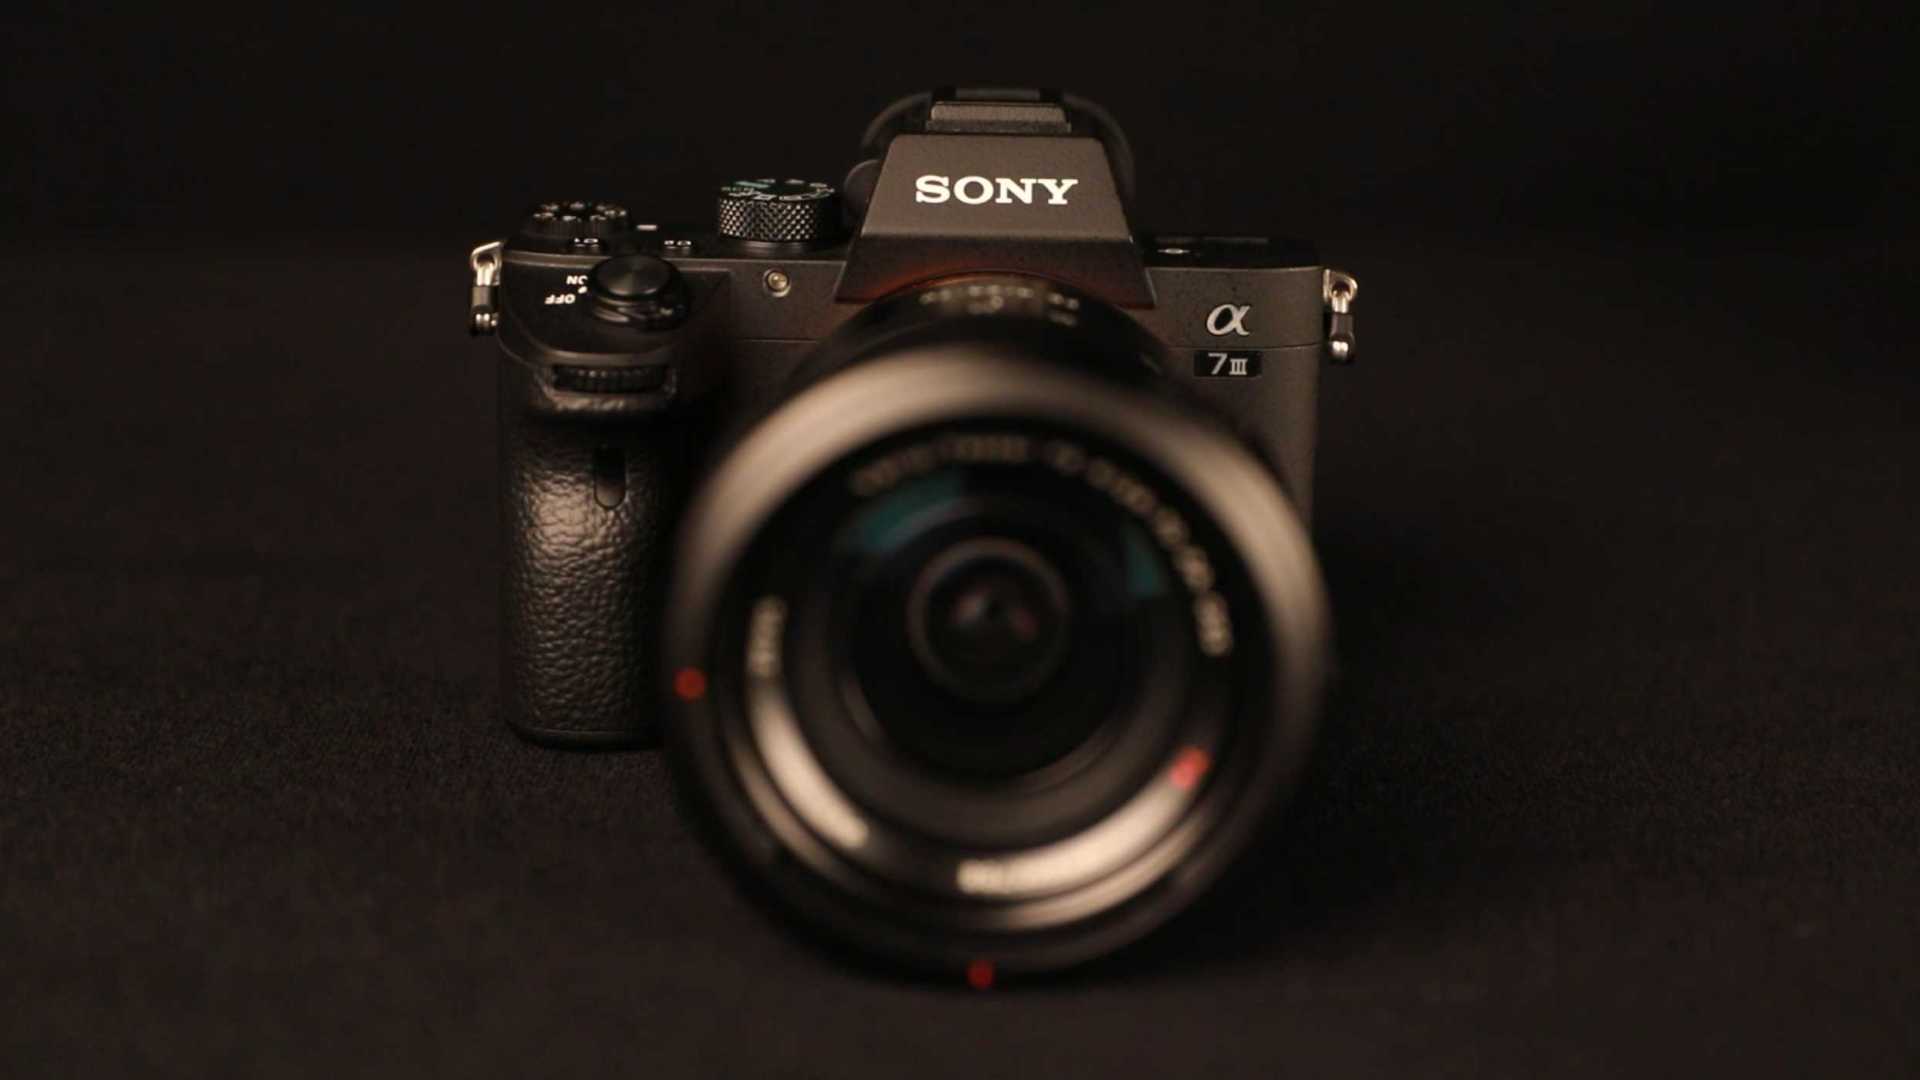 X-S10 and α73